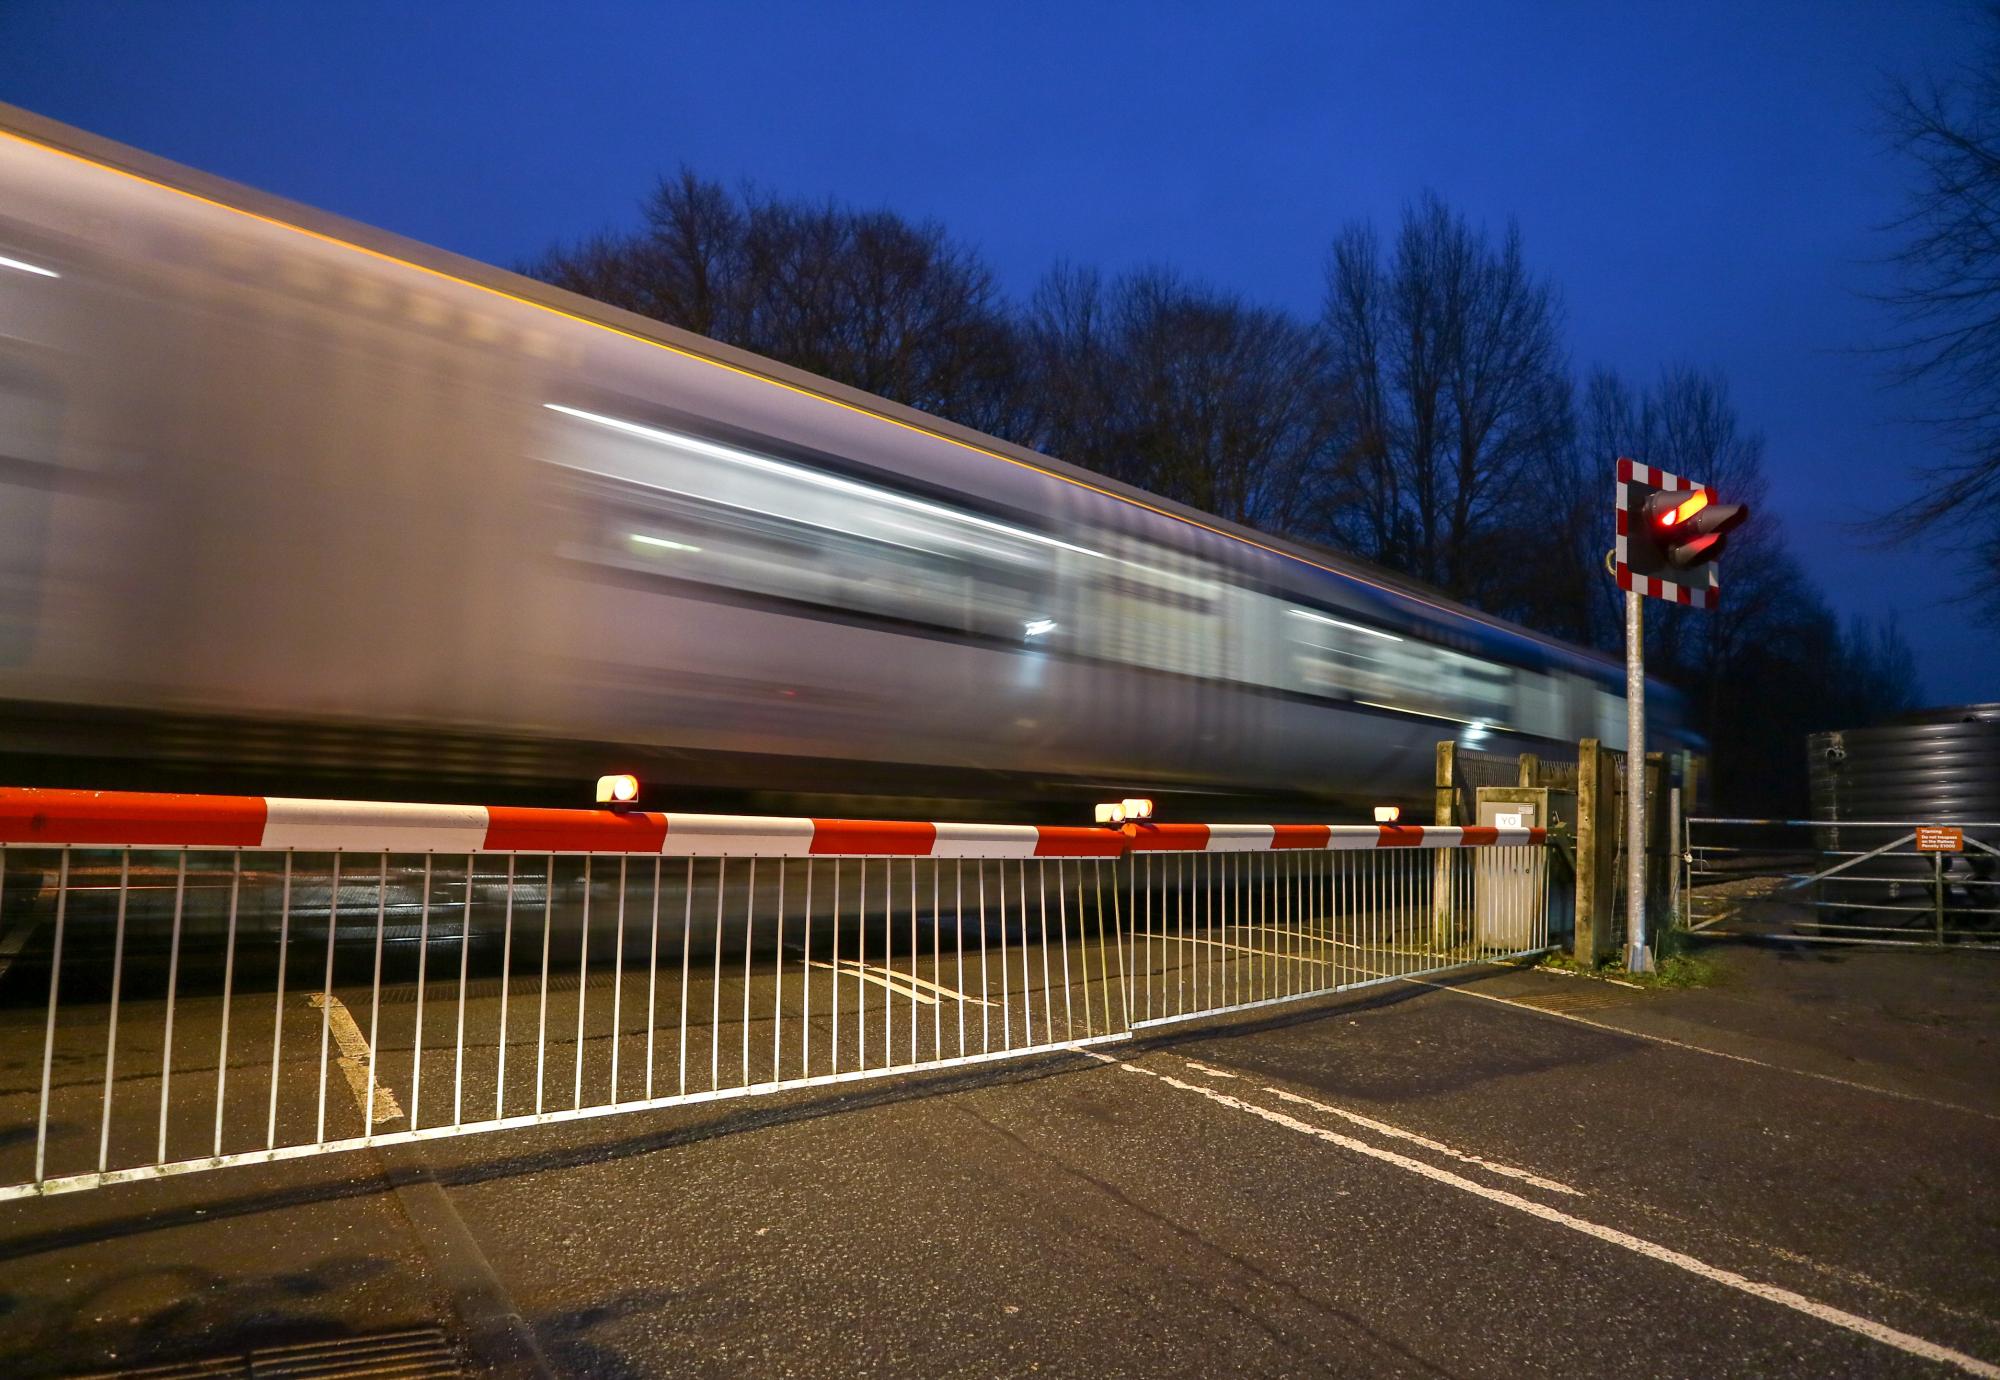 Warning lights showing and the barriers down at a level crossing as a train speeds past, via Istock 